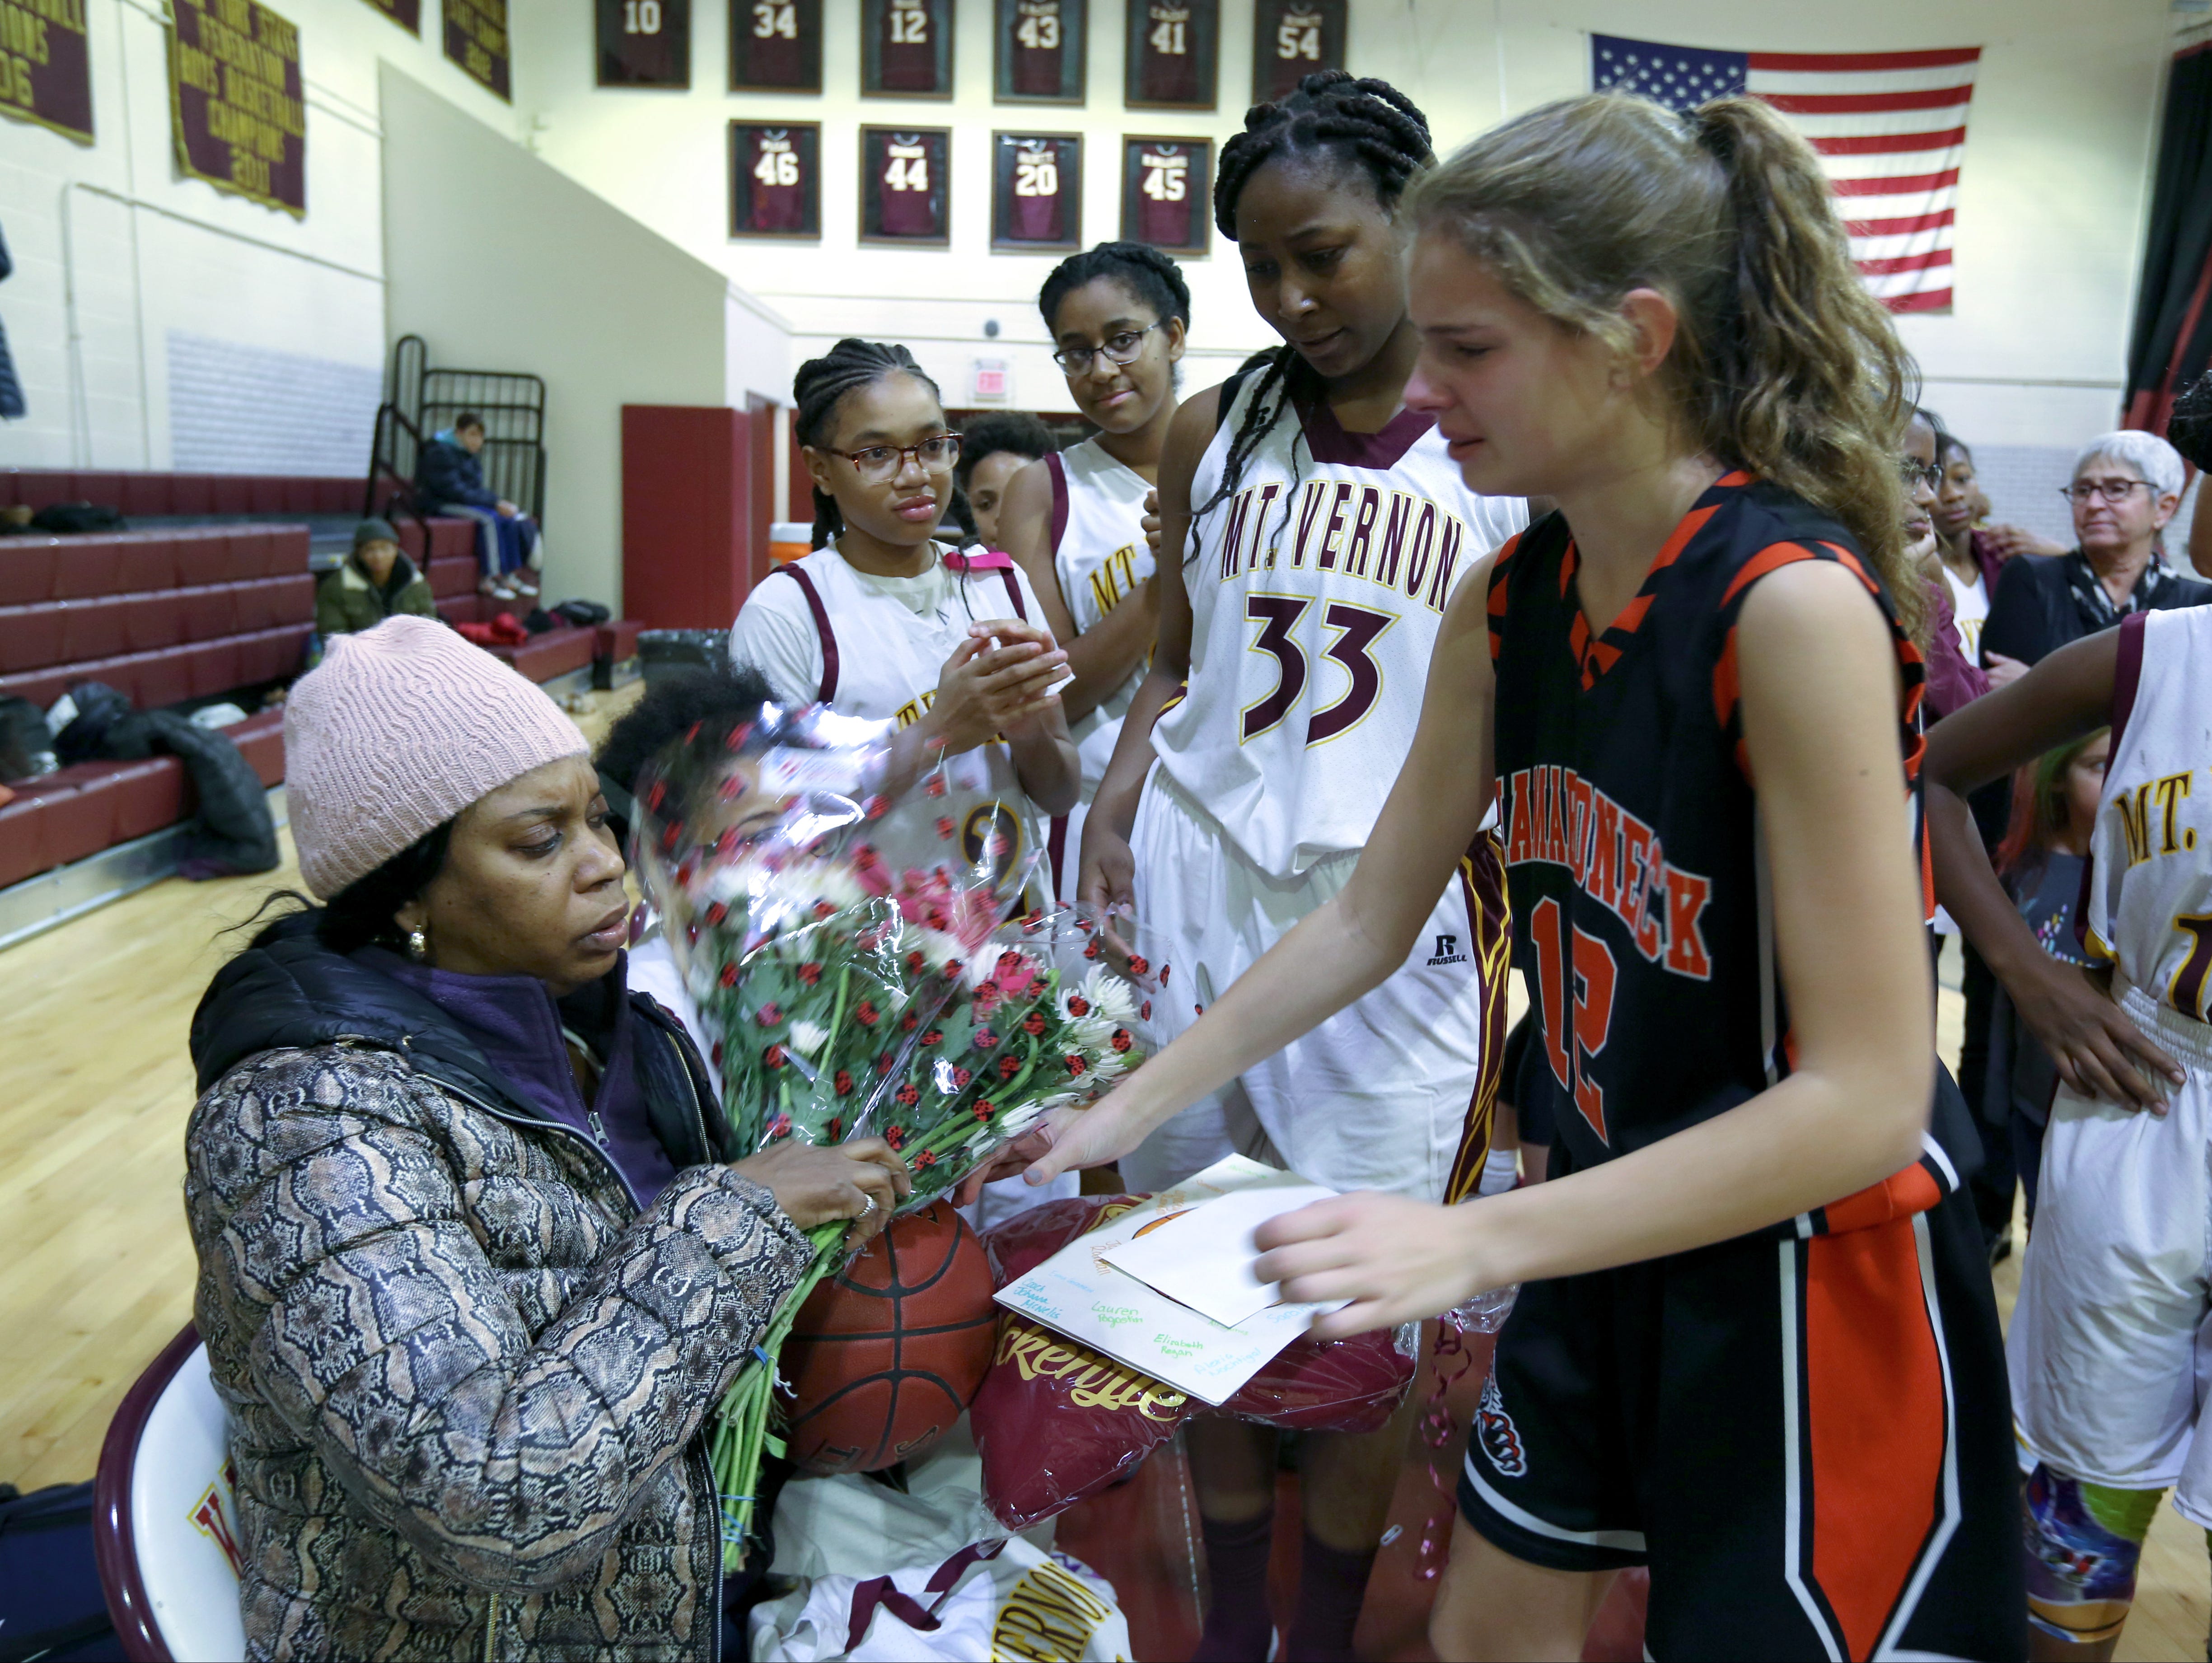 Nadine McKenzie receives flowers before the Mamaroneck at Mount Vernon junior varsity basketball game at Mount Vernon Jan. 6, 2017. Her daughter, Shamoya McKenzie, 13, a member of the Mount Vernon team, was killed by a stray bullet on New Year's Eve.